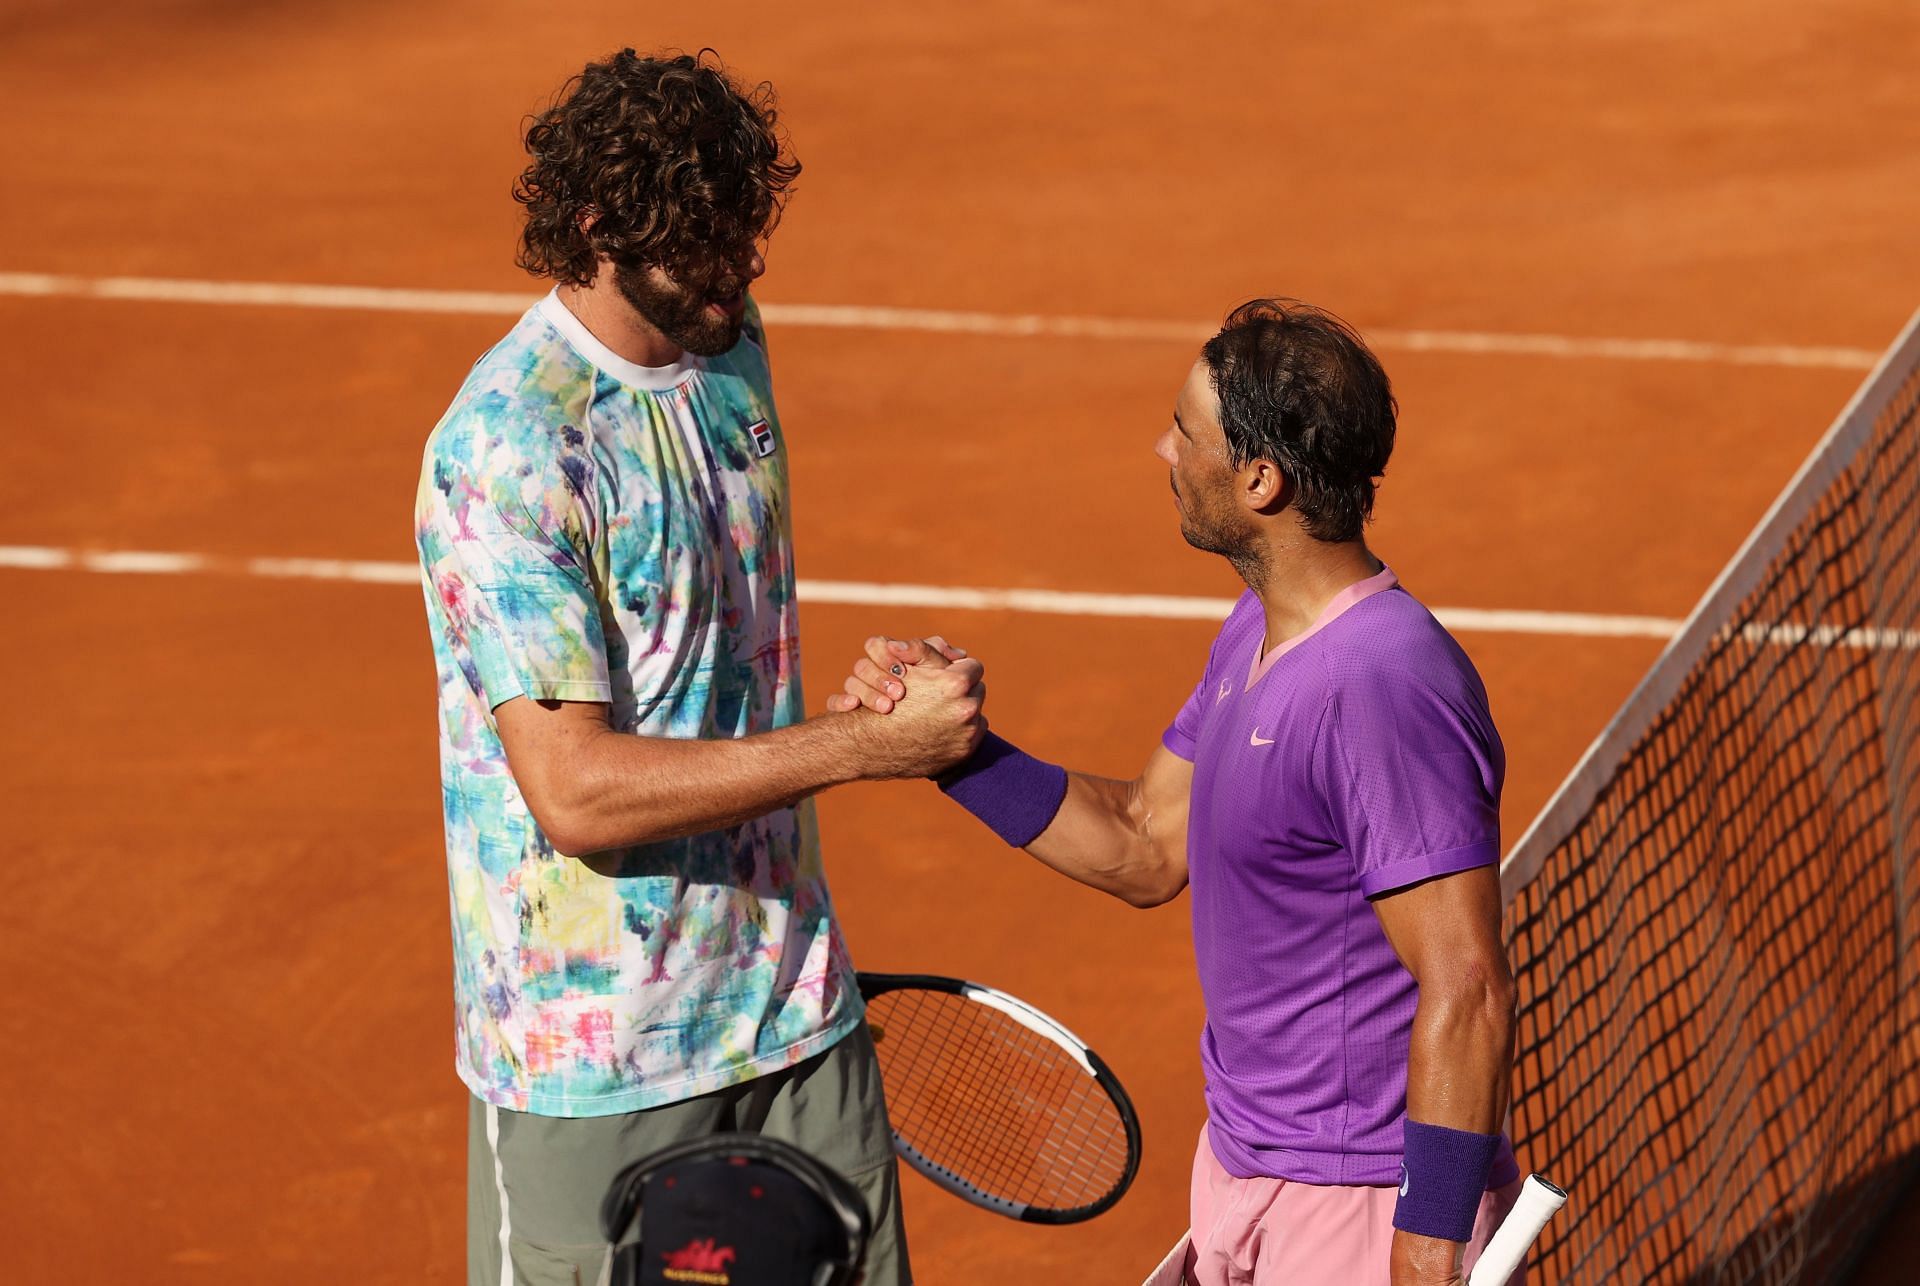 Reilly Opelka with Rafael Nadal at the Italian Open 2021